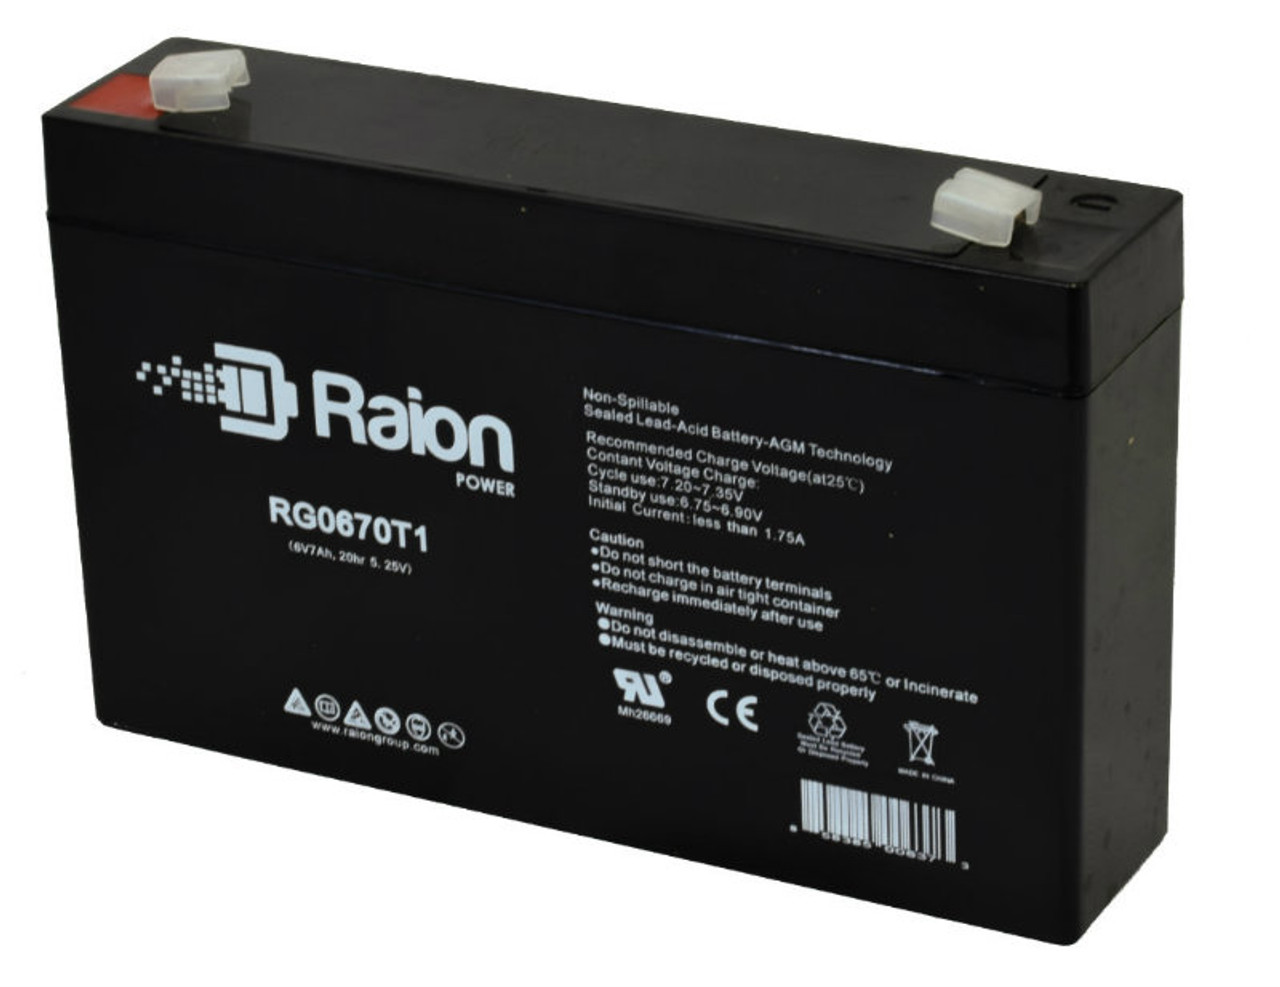 Raion Power RG0670T1 6V 7Ah Replacement Battery Cartridge for Baxter Healthcare TRAVACARE Infusion Medical Equipment